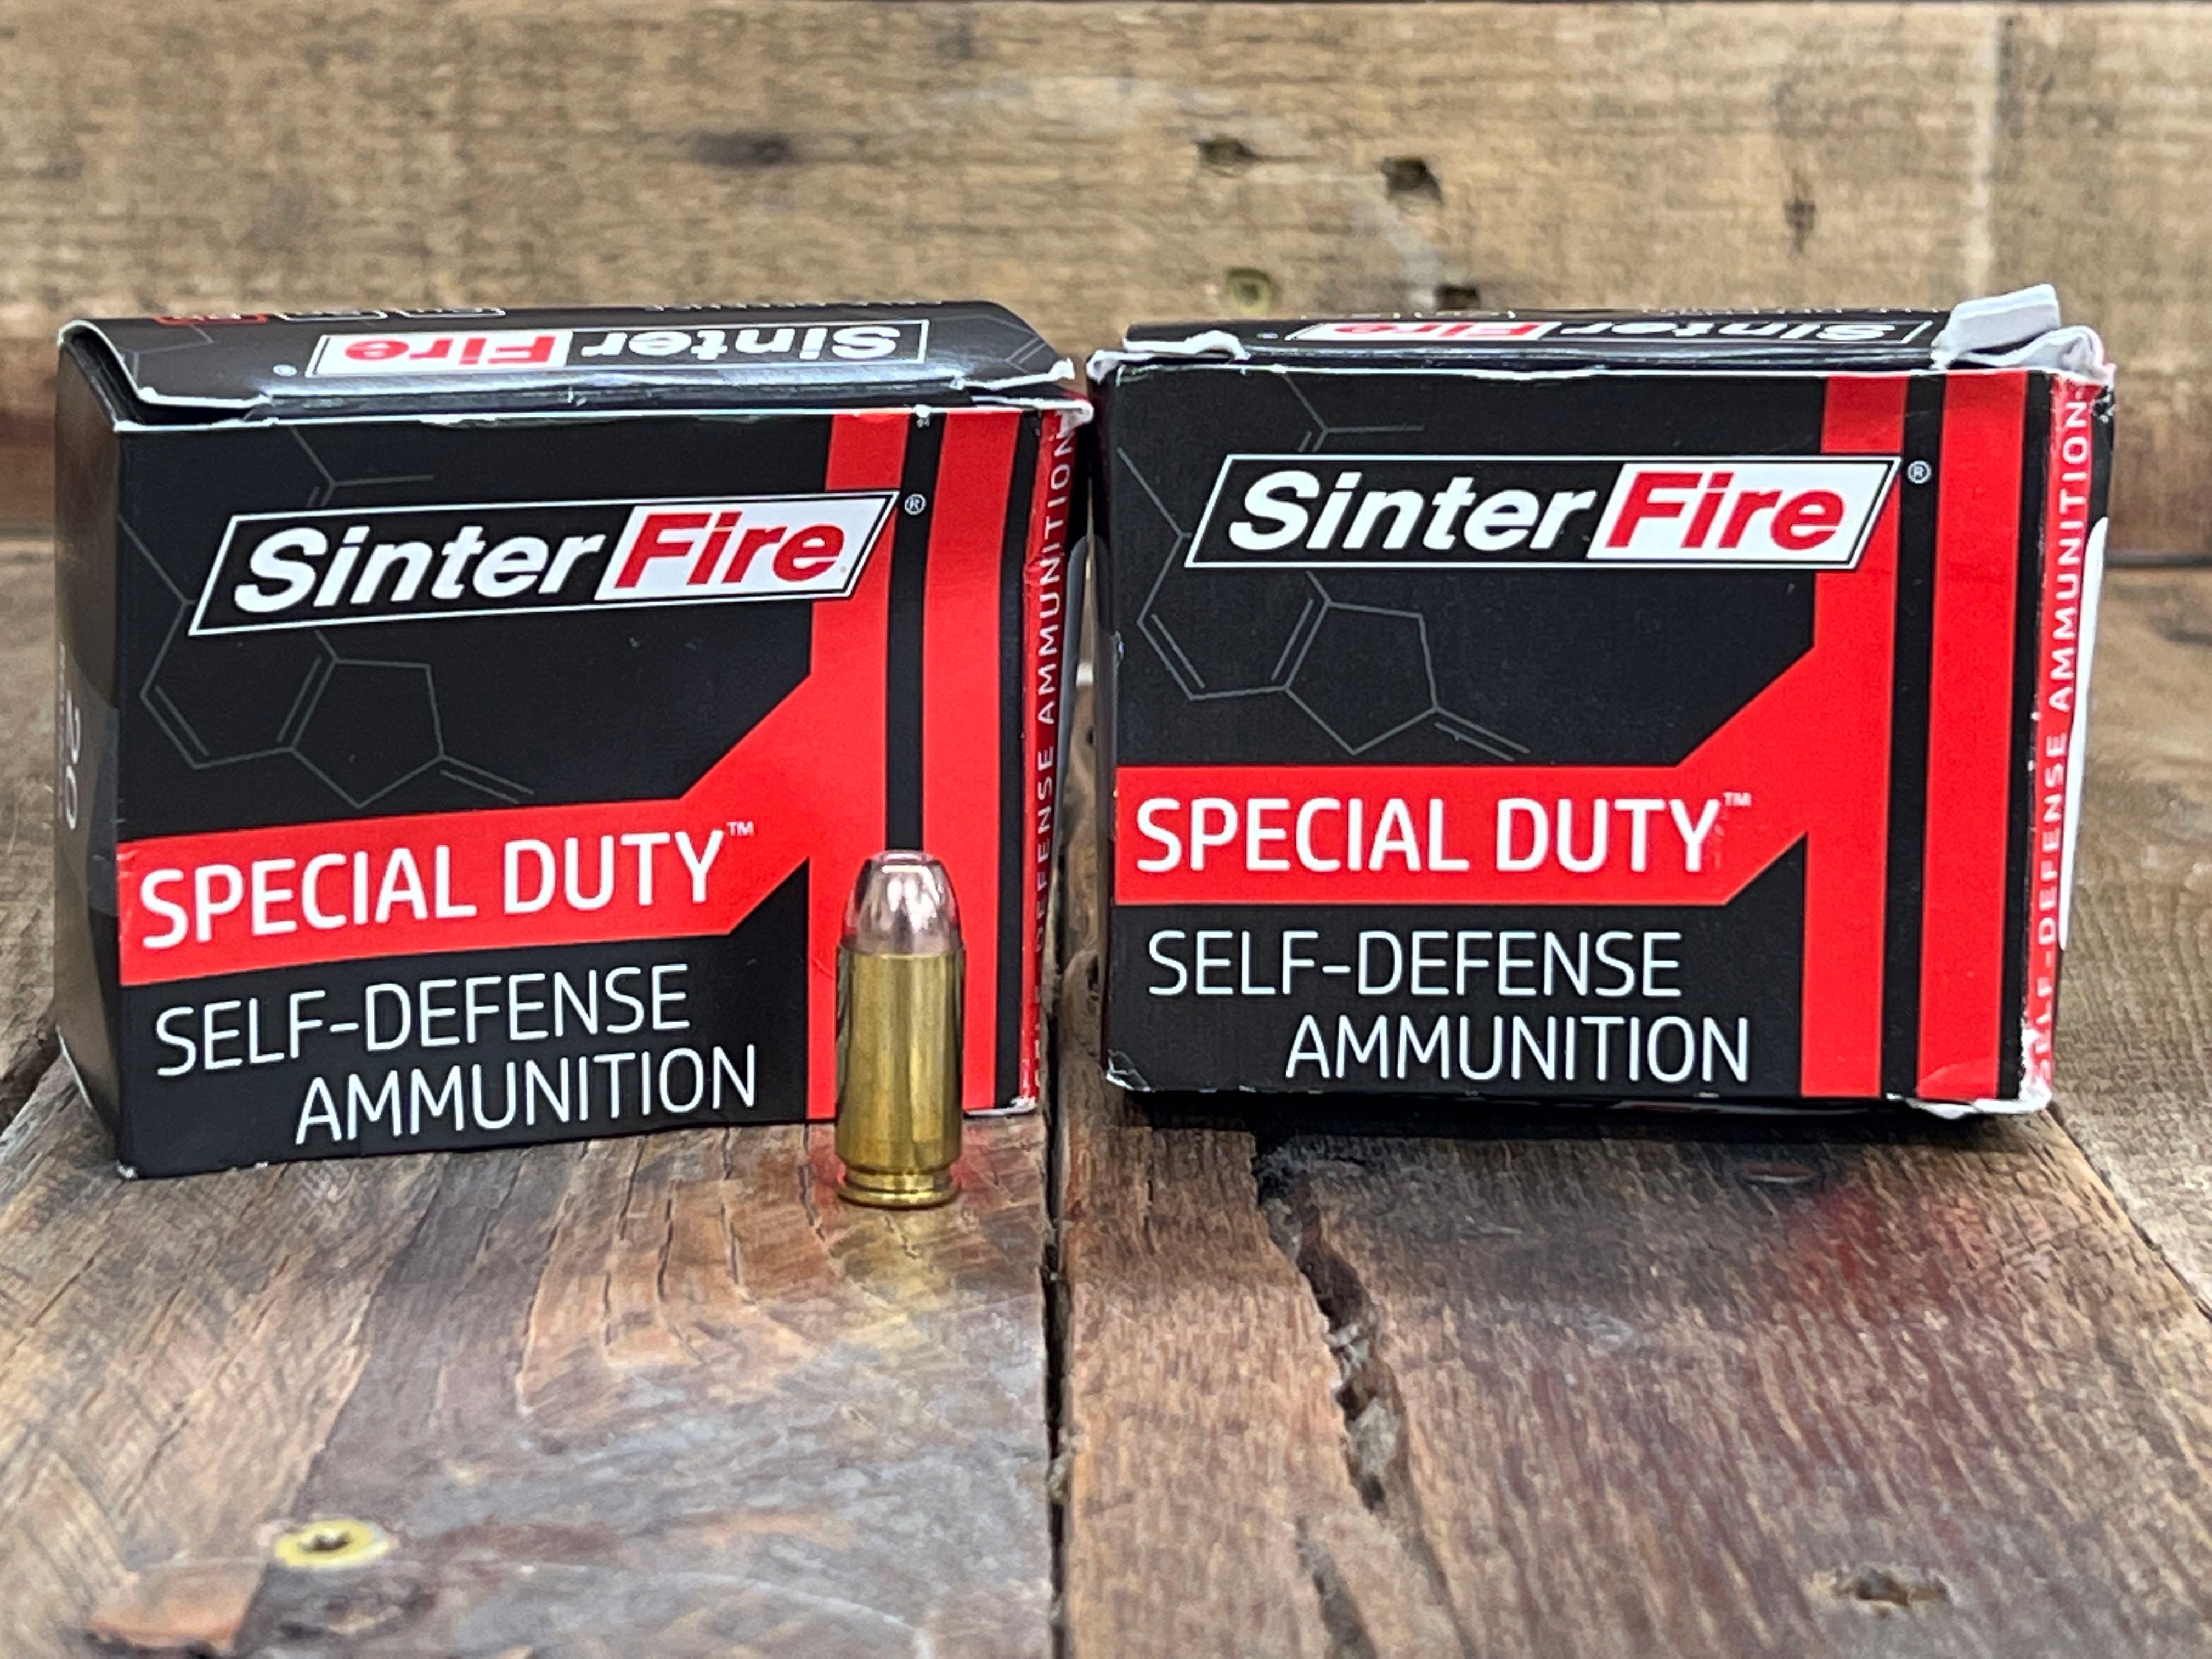 2 BOXES SINTER FIRE 40 S&W SPECIAL DUTY SELF-DEFENSE